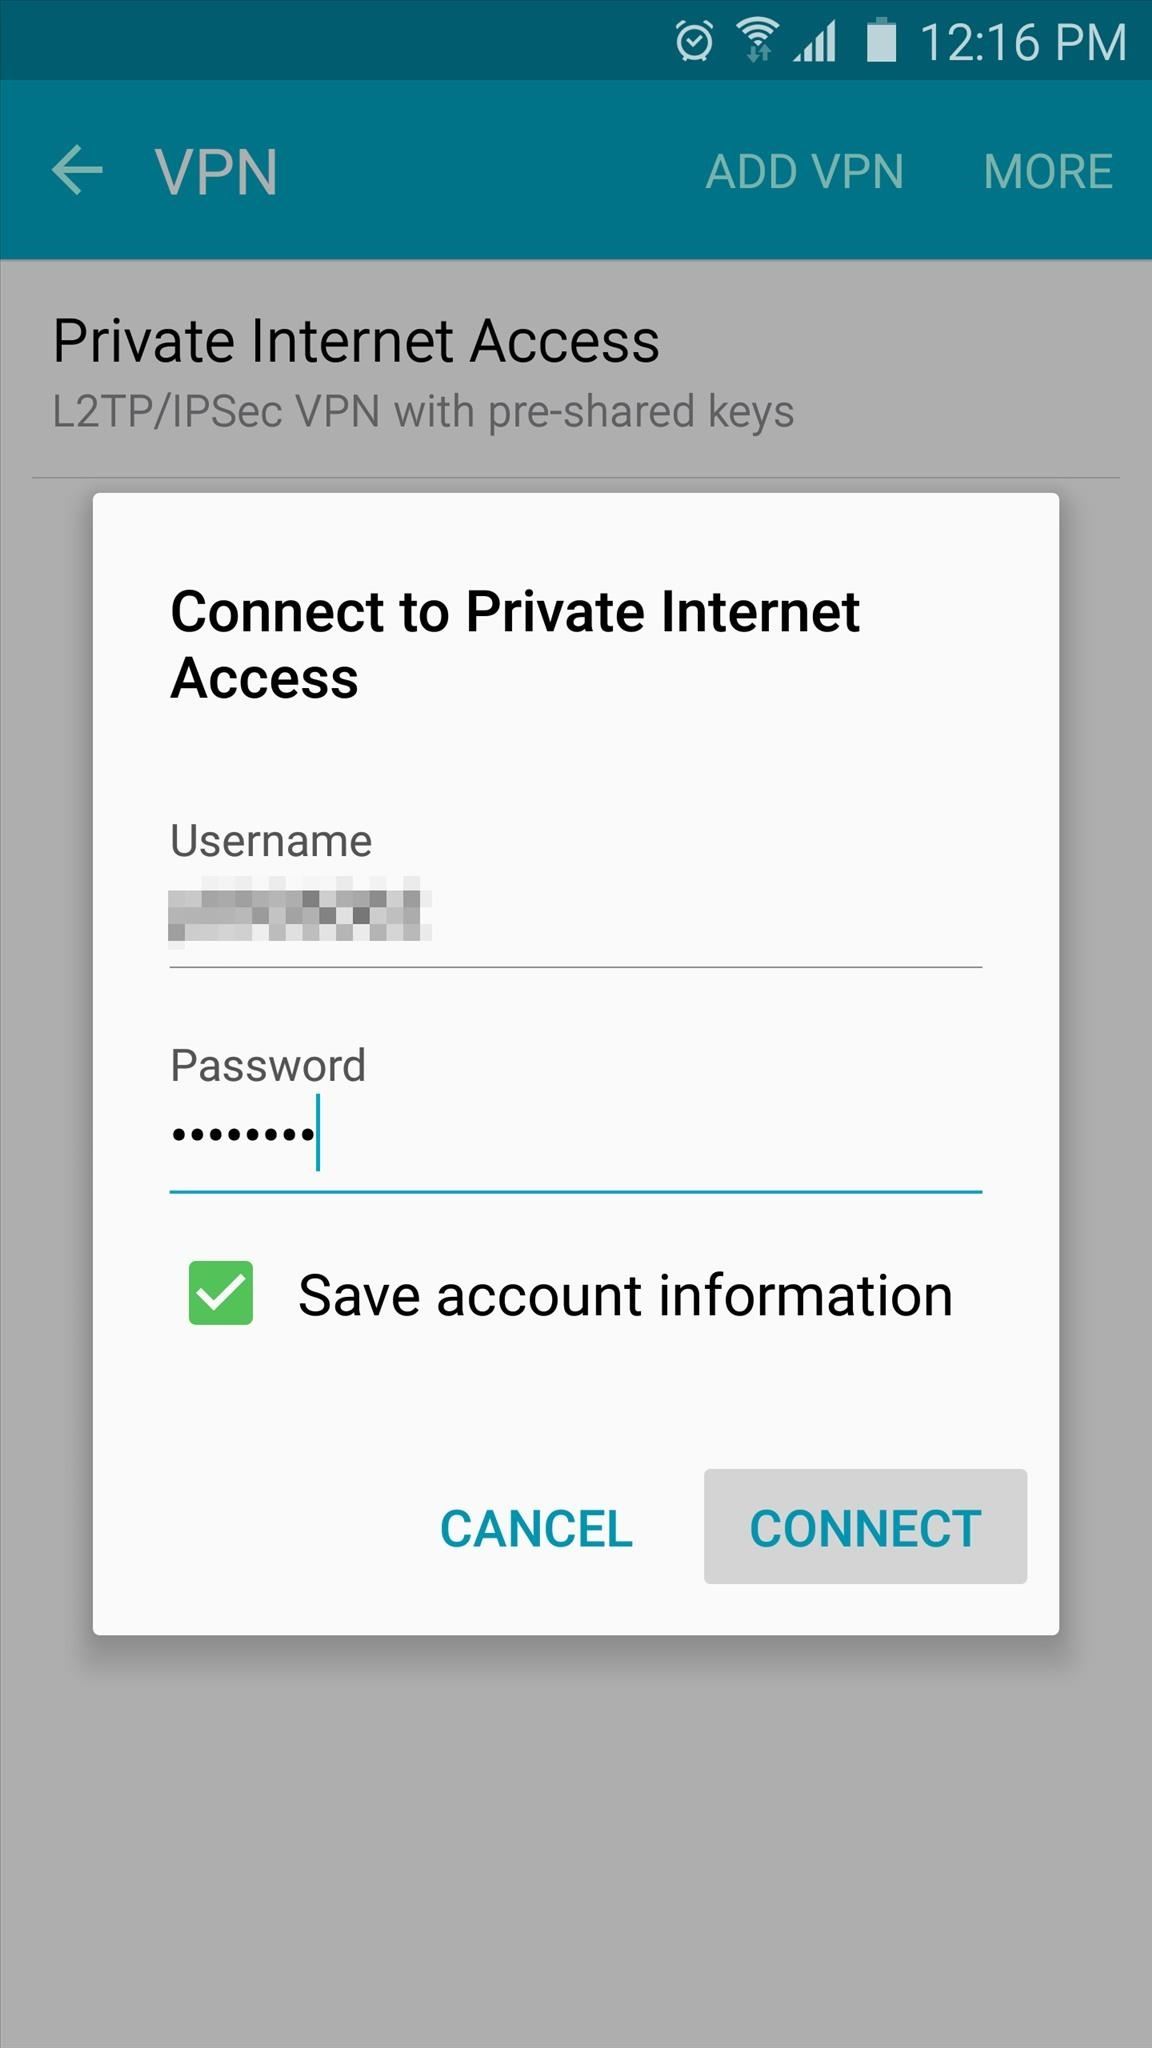 Privacy 101: Using Android Without Compromising Security